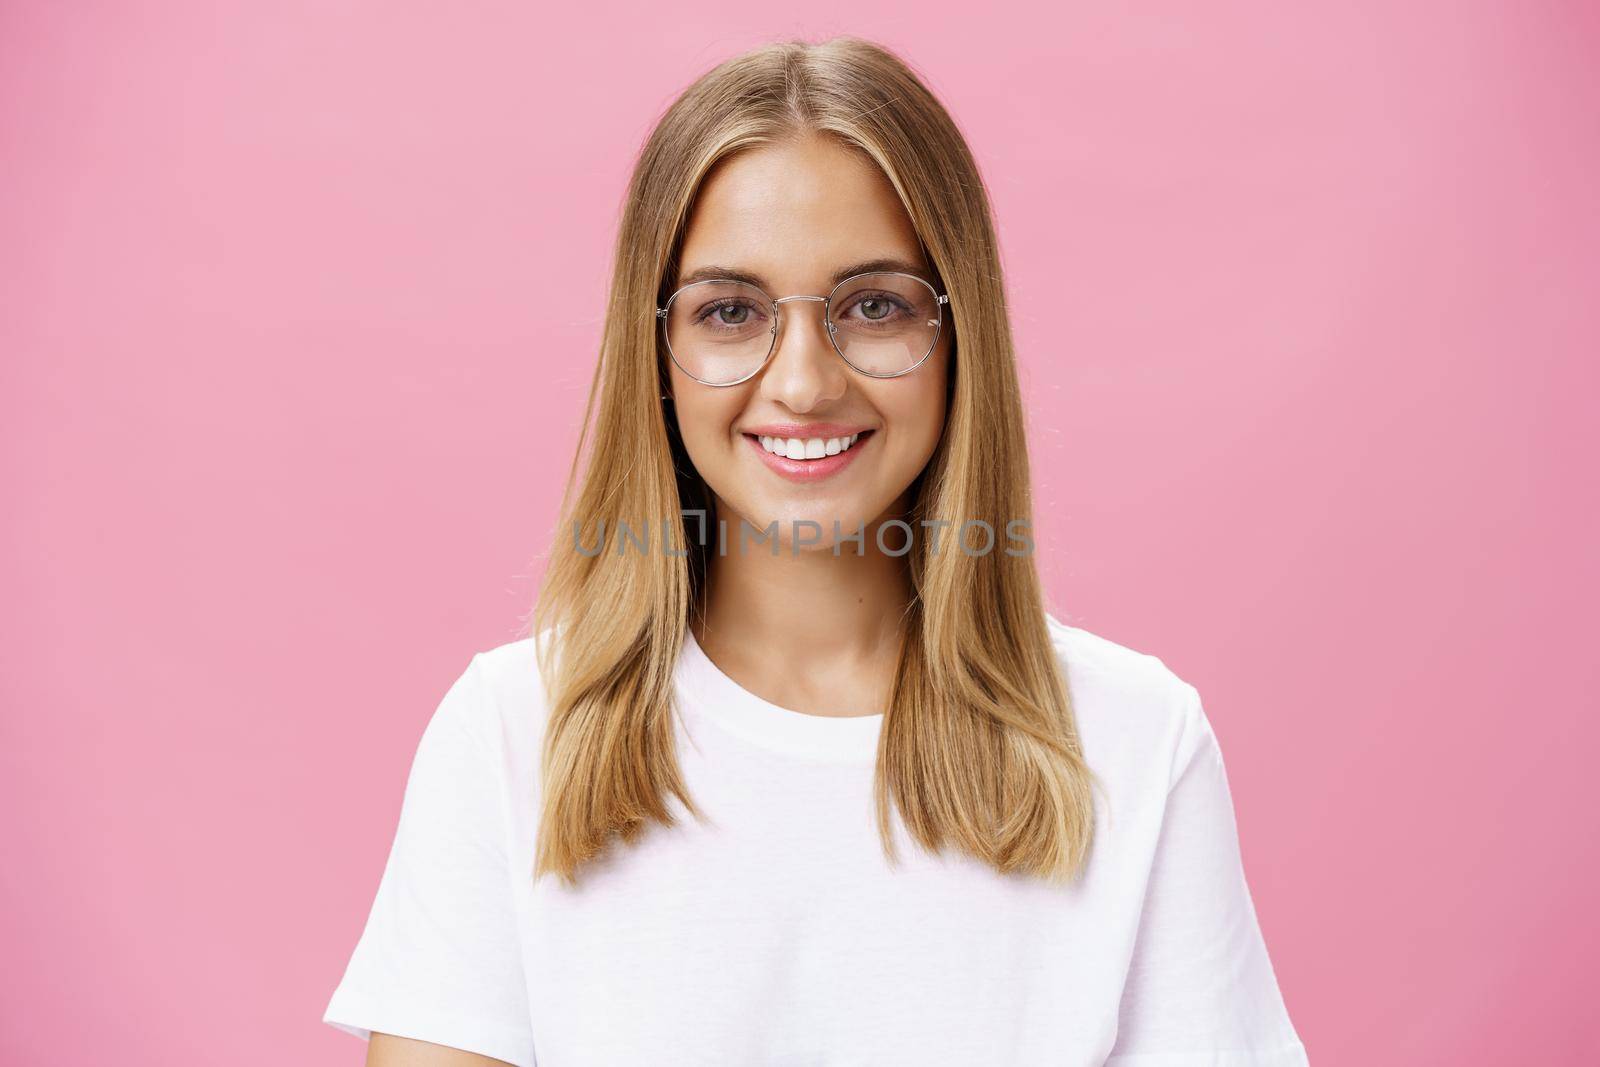 Creative and smart good-looking friendly female with tanned skin and little pimples wearing glasses and white t-shirt smiling broadly with perfect teeth standing plesant over pink wall. Copy space